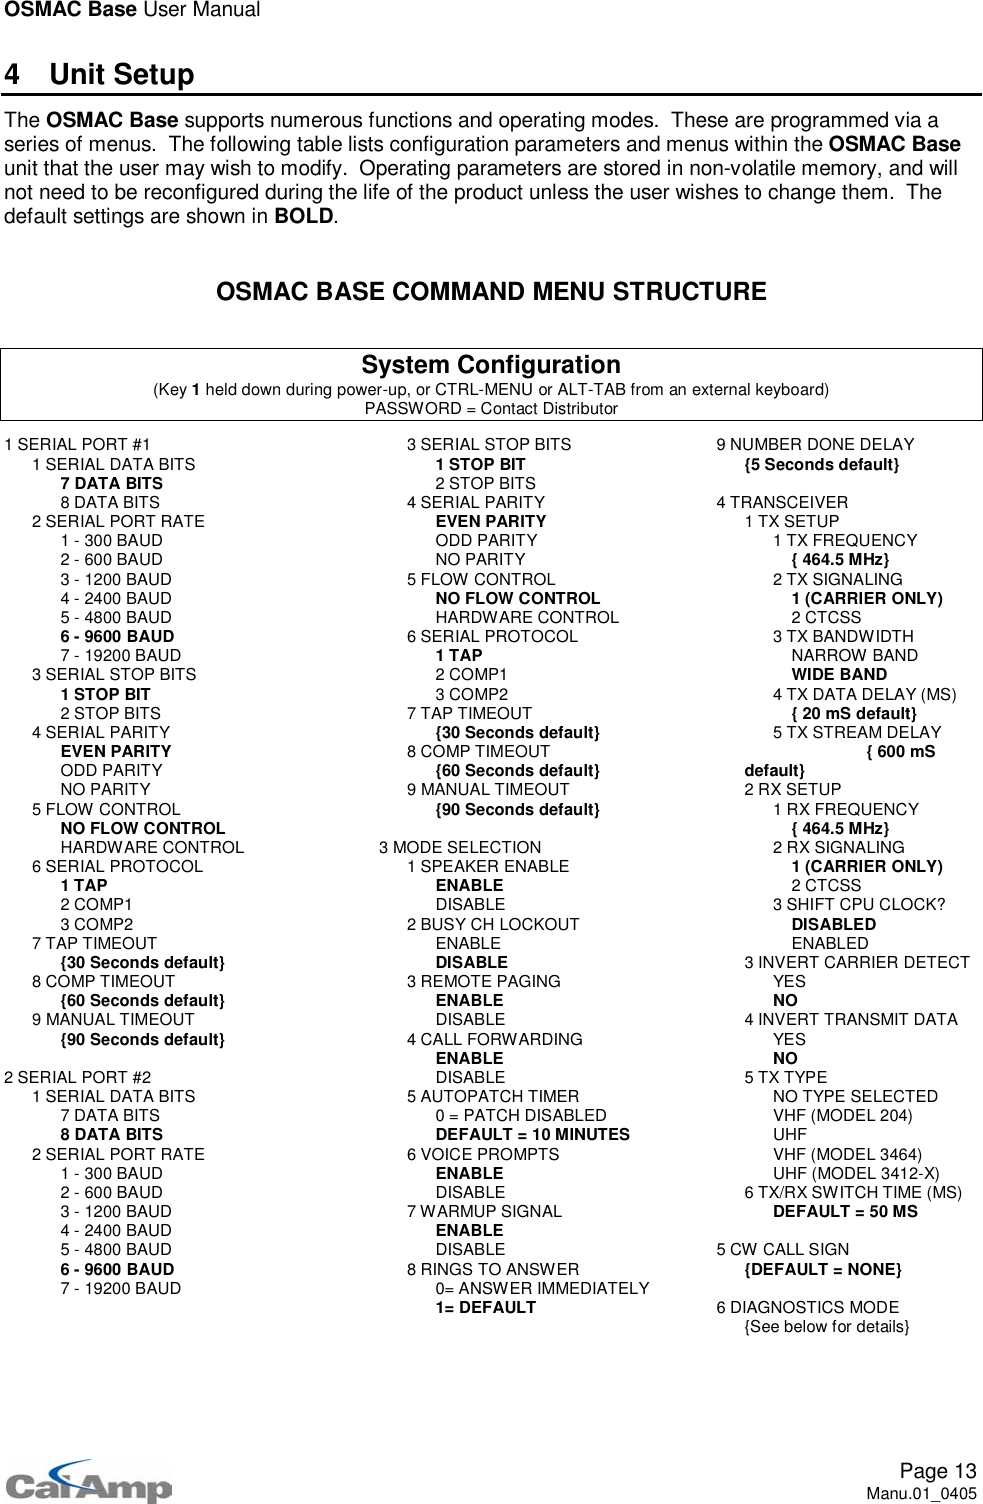 OSMAC Base User ManualPage 13Manu.01_04054UnitSetupThe OSMAC Base supports numerous functions and operating modes. These are programmed via aseries of menus. The following table lists configuration parameters and menus within the OSMAC Baseunit that the user may wish to modify. Operating parameters are stored in non-volatile memory, and willnot need to be reconfigured during the life of the product unless the user wishes to change them. Thedefault settings are shown in BOLD.OSMAC BASE COMMAND MENU STRUCTURESystem Configuration(Key 1held down during power-up, or CTRL-MENU or ALT-TAB from an external keyboard)PASSWORD = Contact Distributor1 SERIAL PORT #11 SERIAL DATA BITS7DATABITS8DATABITS2 SERIAL PORT RATE1-300BAUD2-600BAUD3 - 1200 BAUD4 - 2400 BAUD5 - 4800 BAUD6 - 9600 BAUD7 - 19200 BAUD3 SERIAL STOP BITS1STOPBIT2STOPBITS4 SERIAL PARITYEVEN PARITYODD PARITYNO PARITY5 FLOW CONTROLNO FLOW CONTROLHARDWARE CONTROL6 SERIAL PROTOCOL1TAP2COMP13COMP27TAPTIMEOUT{30 Seconds default}8COMPTIMEOUT{60 Seconds default}9 MANUAL TIMEOUT{90 Seconds default}2 SERIAL PORT #21 SERIAL DATA BITS7DATABITS8DATABITS2 SERIAL PORT RATE1-300BAUD2-600BAUD3 - 1200 BAUD4 - 2400 BAUD5 - 4800 BAUD6 - 9600 BAUD7 - 19200 BAUD3 SERIAL STOP BITS1STOPBIT2STOPBITS4 SERIAL PARITYEVEN PARITYODD PARITYNO PARITY5 FLOW CONTROLNO FLOW CONTROLHARDWARE CONTROL6 SERIAL PROTOCOL1TAP2COMP13COMP27TAPTIMEOUT{30 Seconds default}8COMPTIMEOUT{60 Seconds default}9 MANUAL TIMEOUT{90 Seconds default}3 MODE SELECTION1 SPEAKER ENABLEENABLEDISABLE2 BUSY CH LOCKOUTENABLEDISABLE3 REMOTE PAGINGENABLEDISABLE4 CALL FORWARDINGENABLEDISABLE5 AUTOPATCH TIMER0 = PATCH DISABLEDDEFAULT = 10 MINUTES6 VOICE PROMPTSENABLEDISABLE7WARMUPSIGNALENABLEDISABLE8 RINGS TO ANSWER0= ANSWER IMMEDIATELY1= DEFAULT9 NUMBER DONE DELAY{5 Seconds default}4 TRANSCEIVER1 TX SETUP1TXFREQUENCY{464.5MHz}2 TX SIGNALING1 (CARRIER ONLY)2CTCSS3 TX BANDWIDTHNARROW BANDWIDE BAND4 TX DATA DELAY (MS){20mSdefault}5 TX STREAM DELAY{600mSdefault}2 RX SETUP1RXFREQUENCY{464.5MHz}2 RX SIGNALING1 (CARRIER ONLY)2CTCSS3 SHIFT CPU CLOCK?DISABLEDENABLED3 INVERT CARRIER DETECTYESNO4 INVERT TRANSMIT DATAYESNO5TXTYPENO TYPE SELECTEDVHF (MODEL 204)UHFVHF (MODEL 3464)UHF (MODEL 3412-X)6 TX/RX SWITCH TIME (MS)DEFAULT = 50 MS5CWCALLSIGN{DEFAULT = NONE}6 DIAGNOSTICS MODE{See below for details}